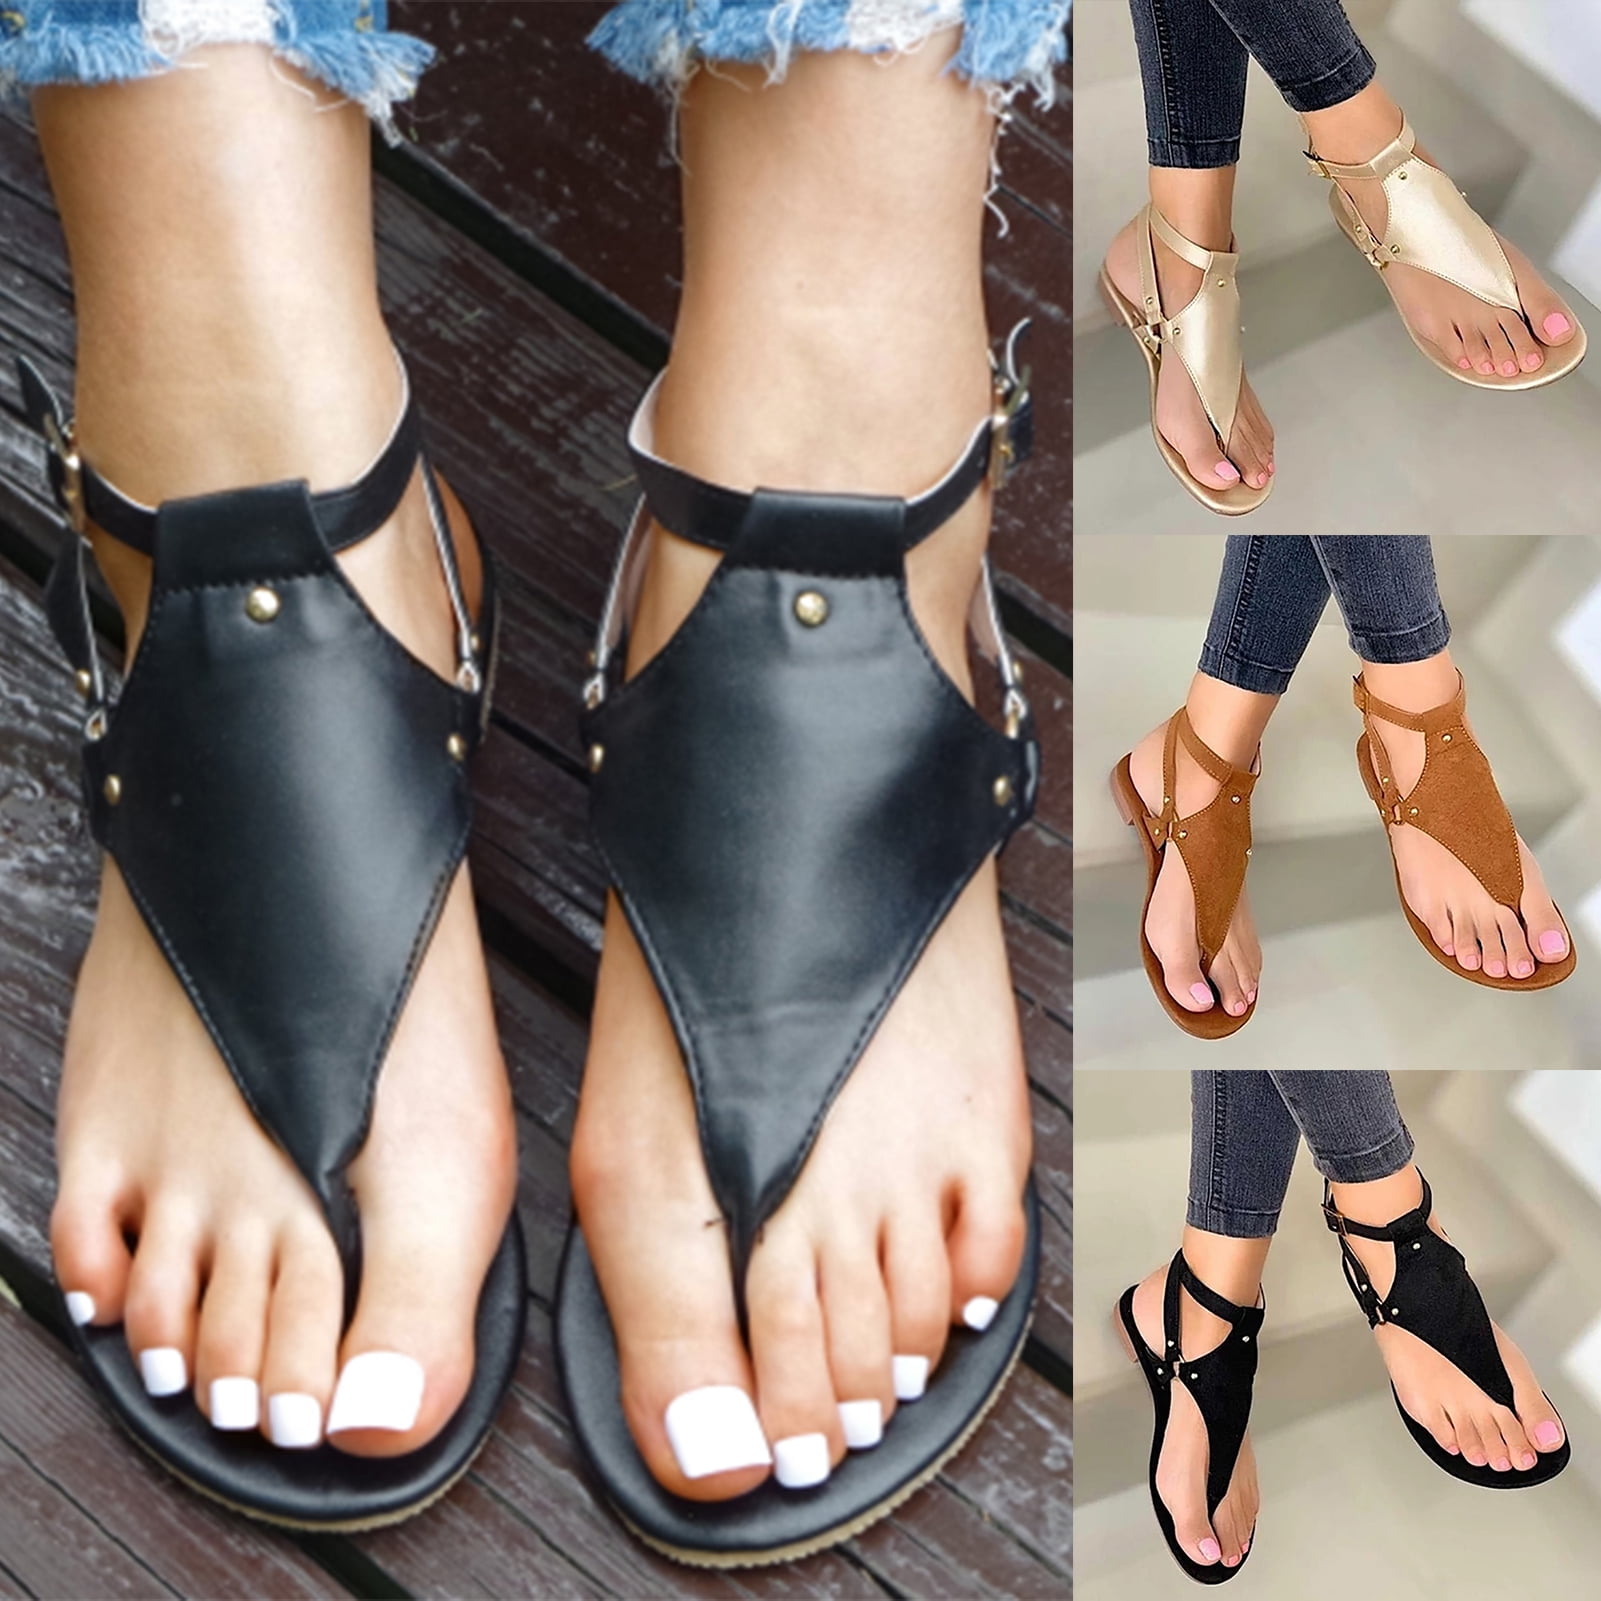 Details about   Gladiator Shoes Ladies Summer Cut Out Sandals Boots Open Toes Rivet Flats Shoes 